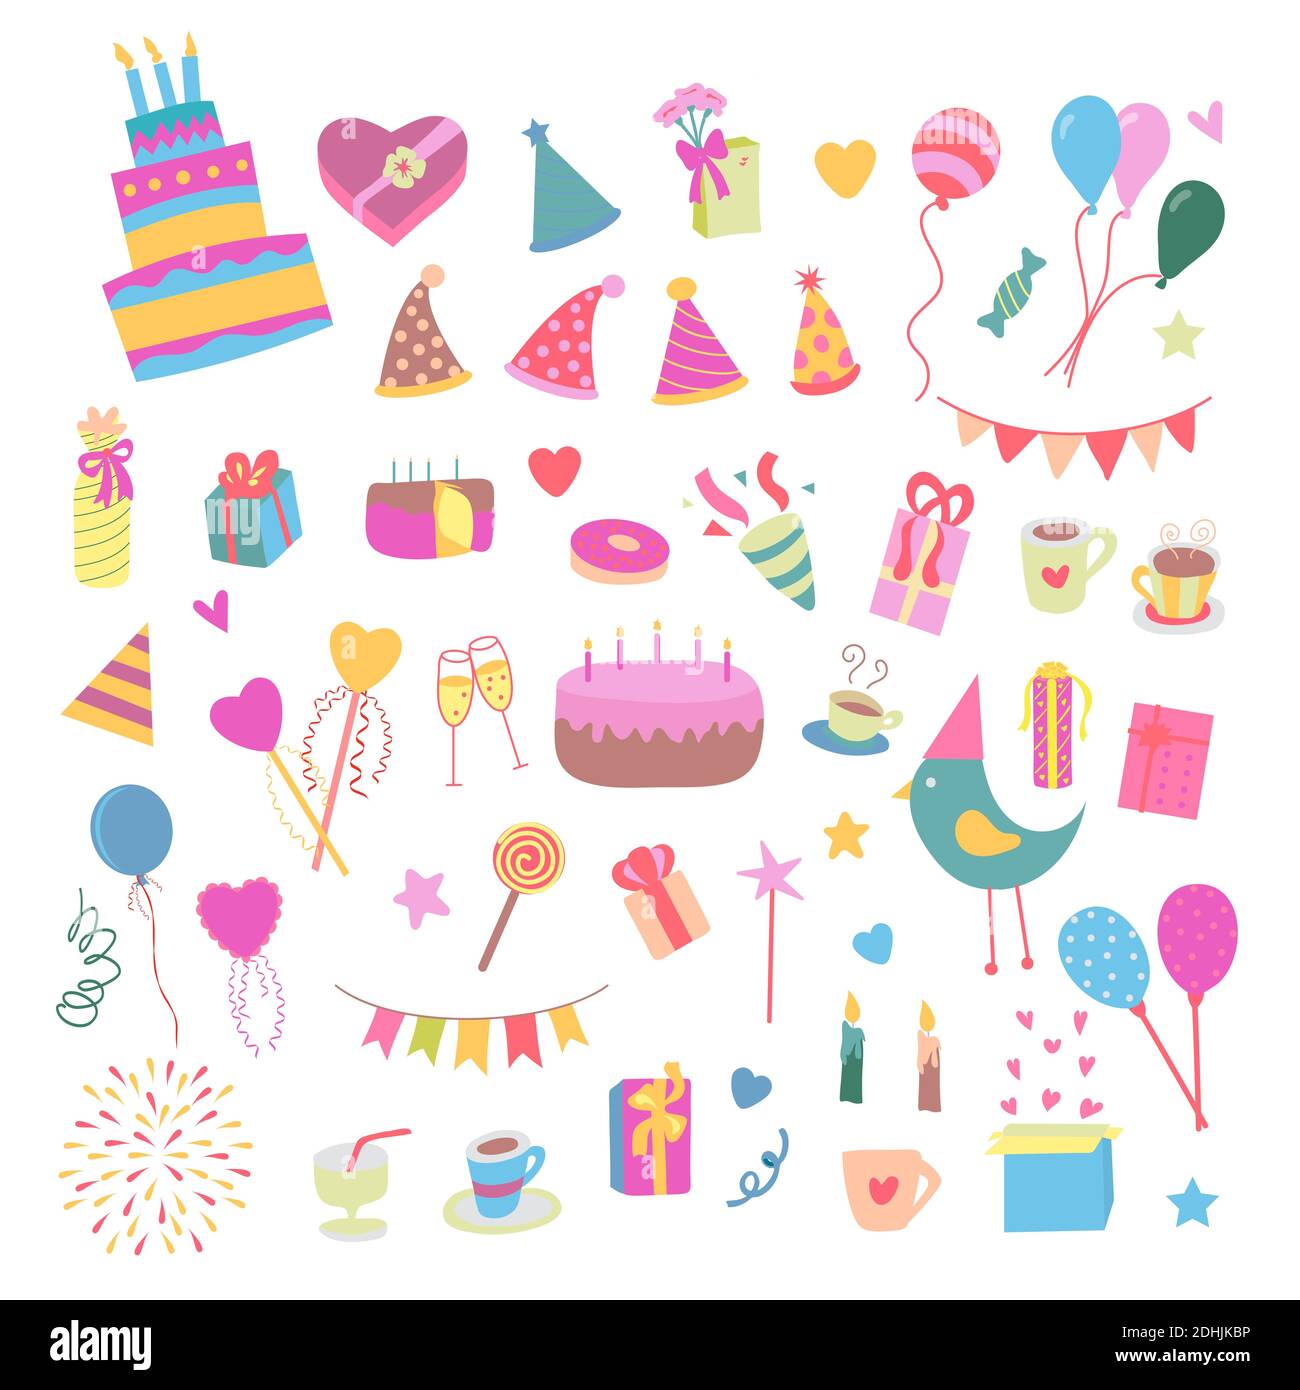 Vector illustration birthday party colorful accessories and decoration, sweet treats, cakes, balloons, candies, gifts in flat cartoon style. Stock Vector